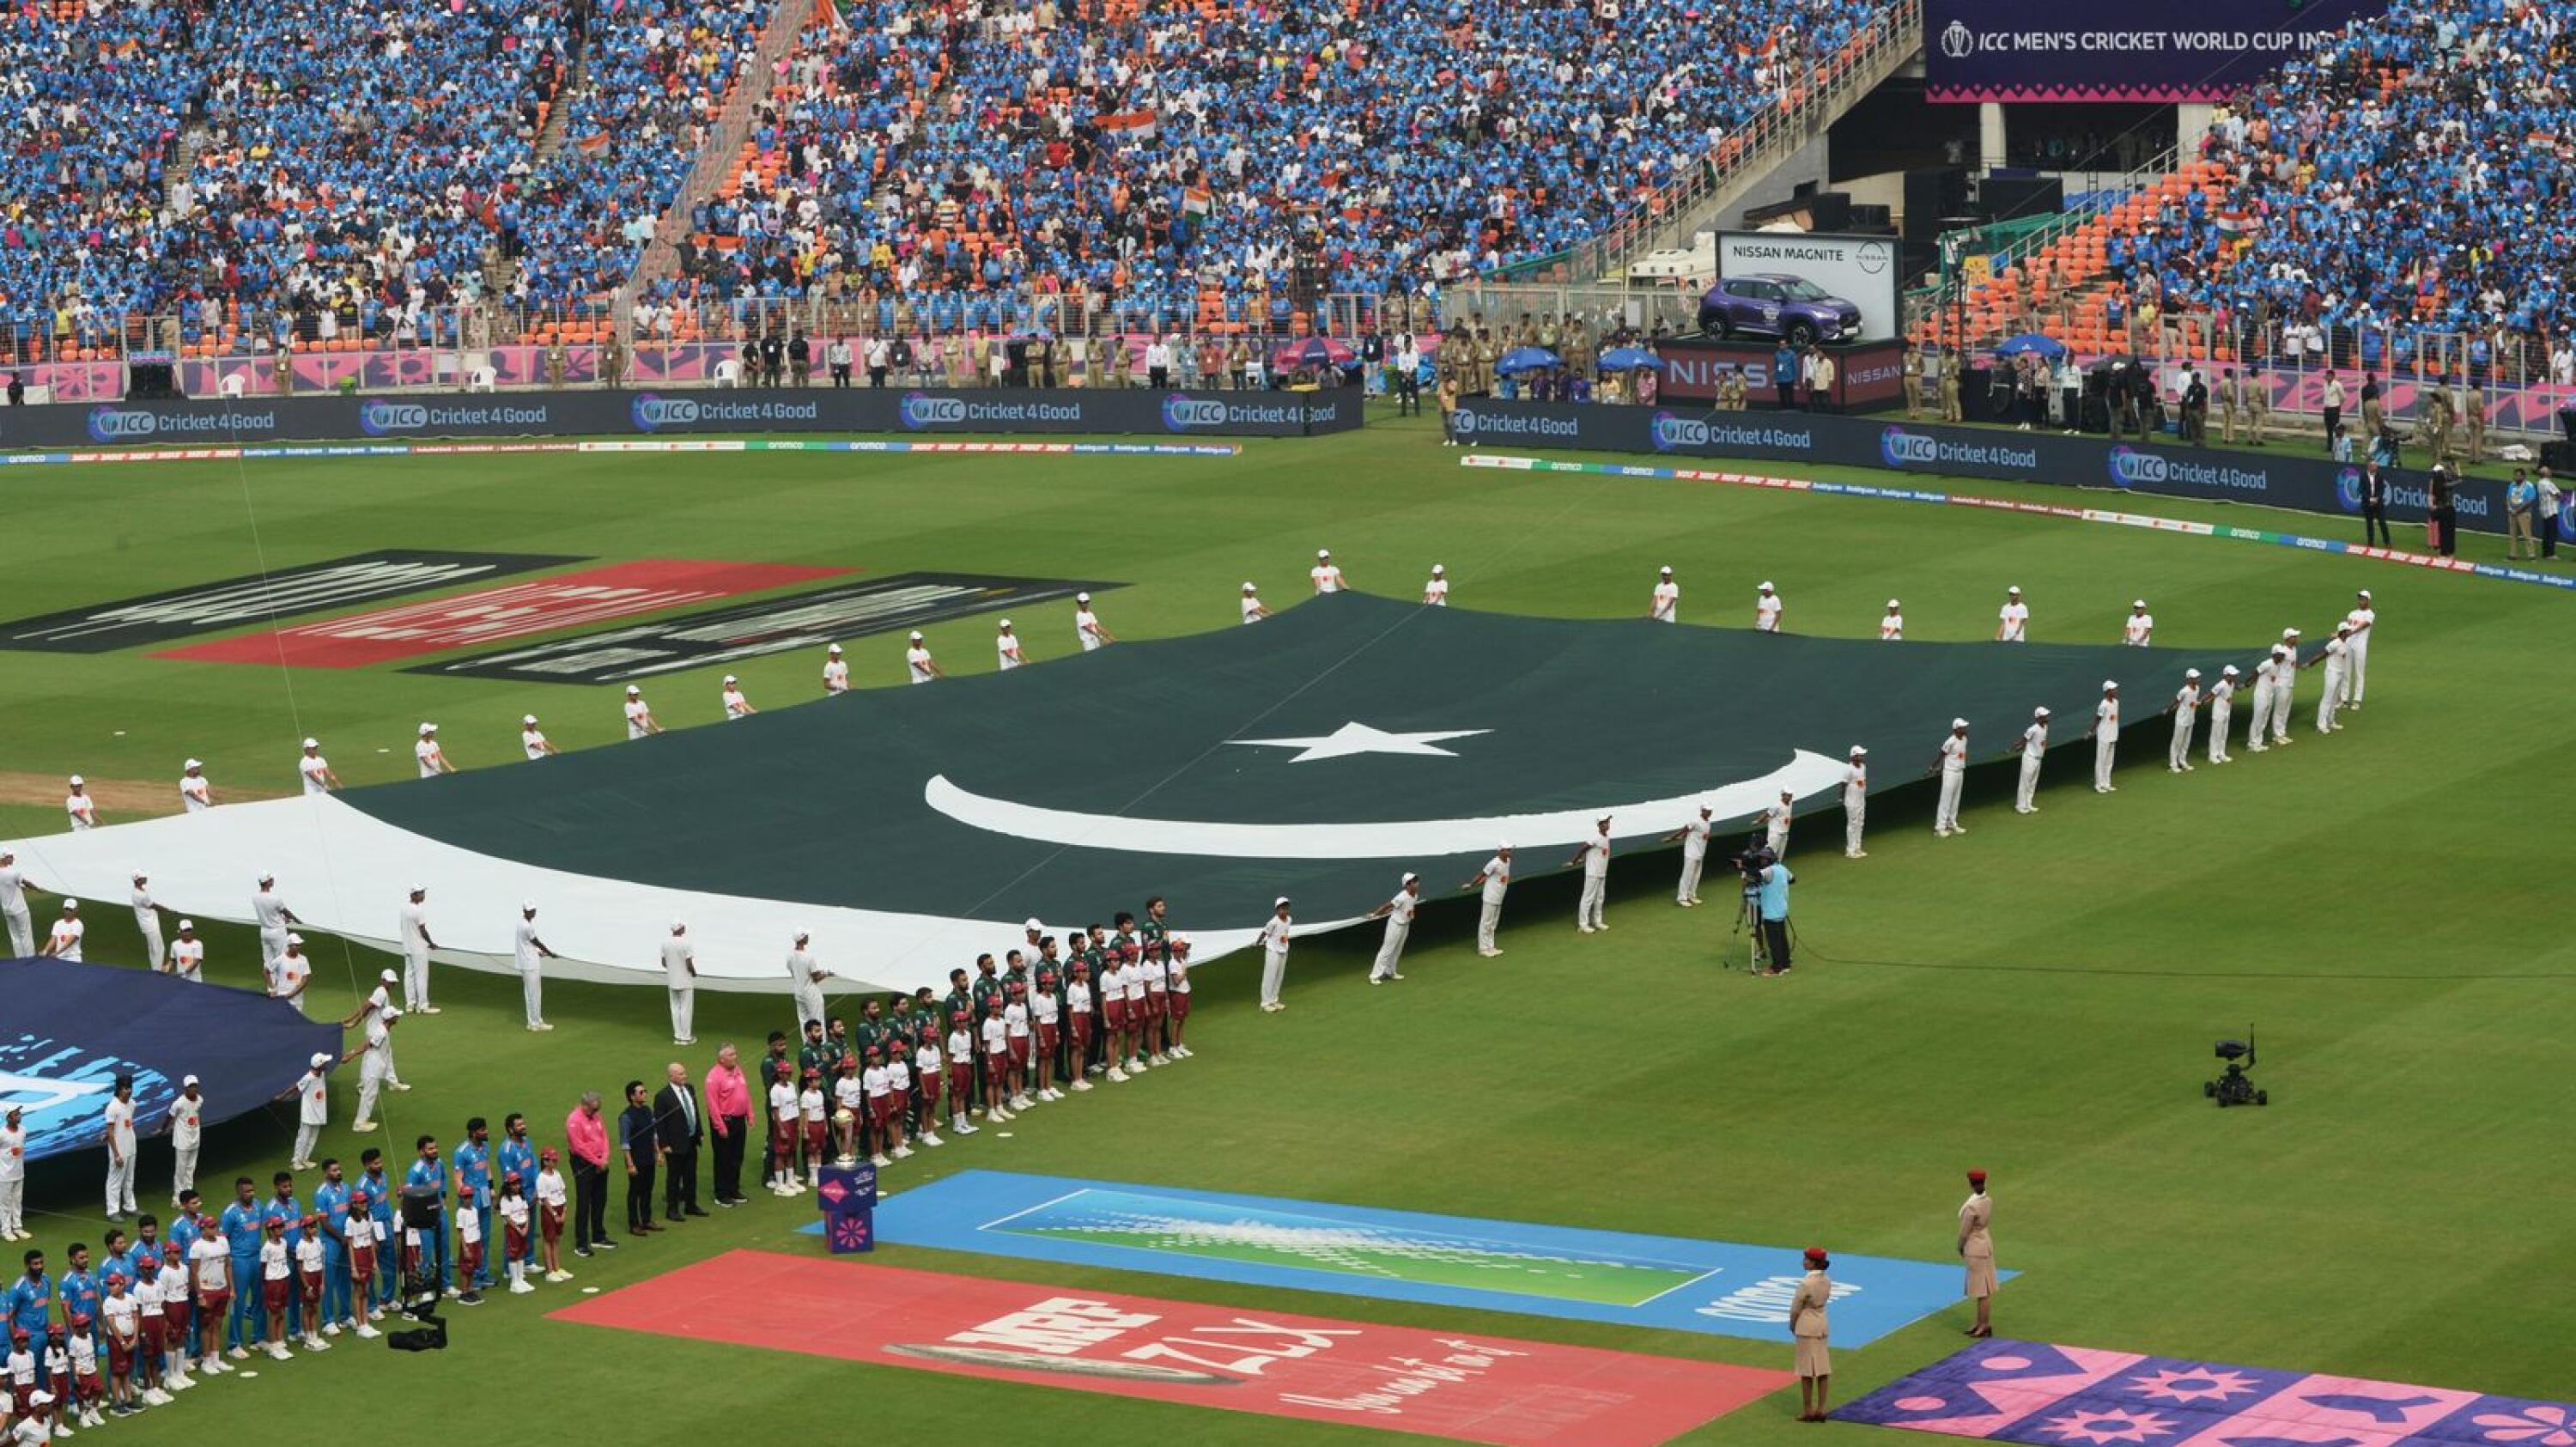 A large national flag of Pakistan is displayed before the start of ICC Men’s Cricket World Cup match between India and Pakistan at the Narendra Modi Stadium in Ahmedabad